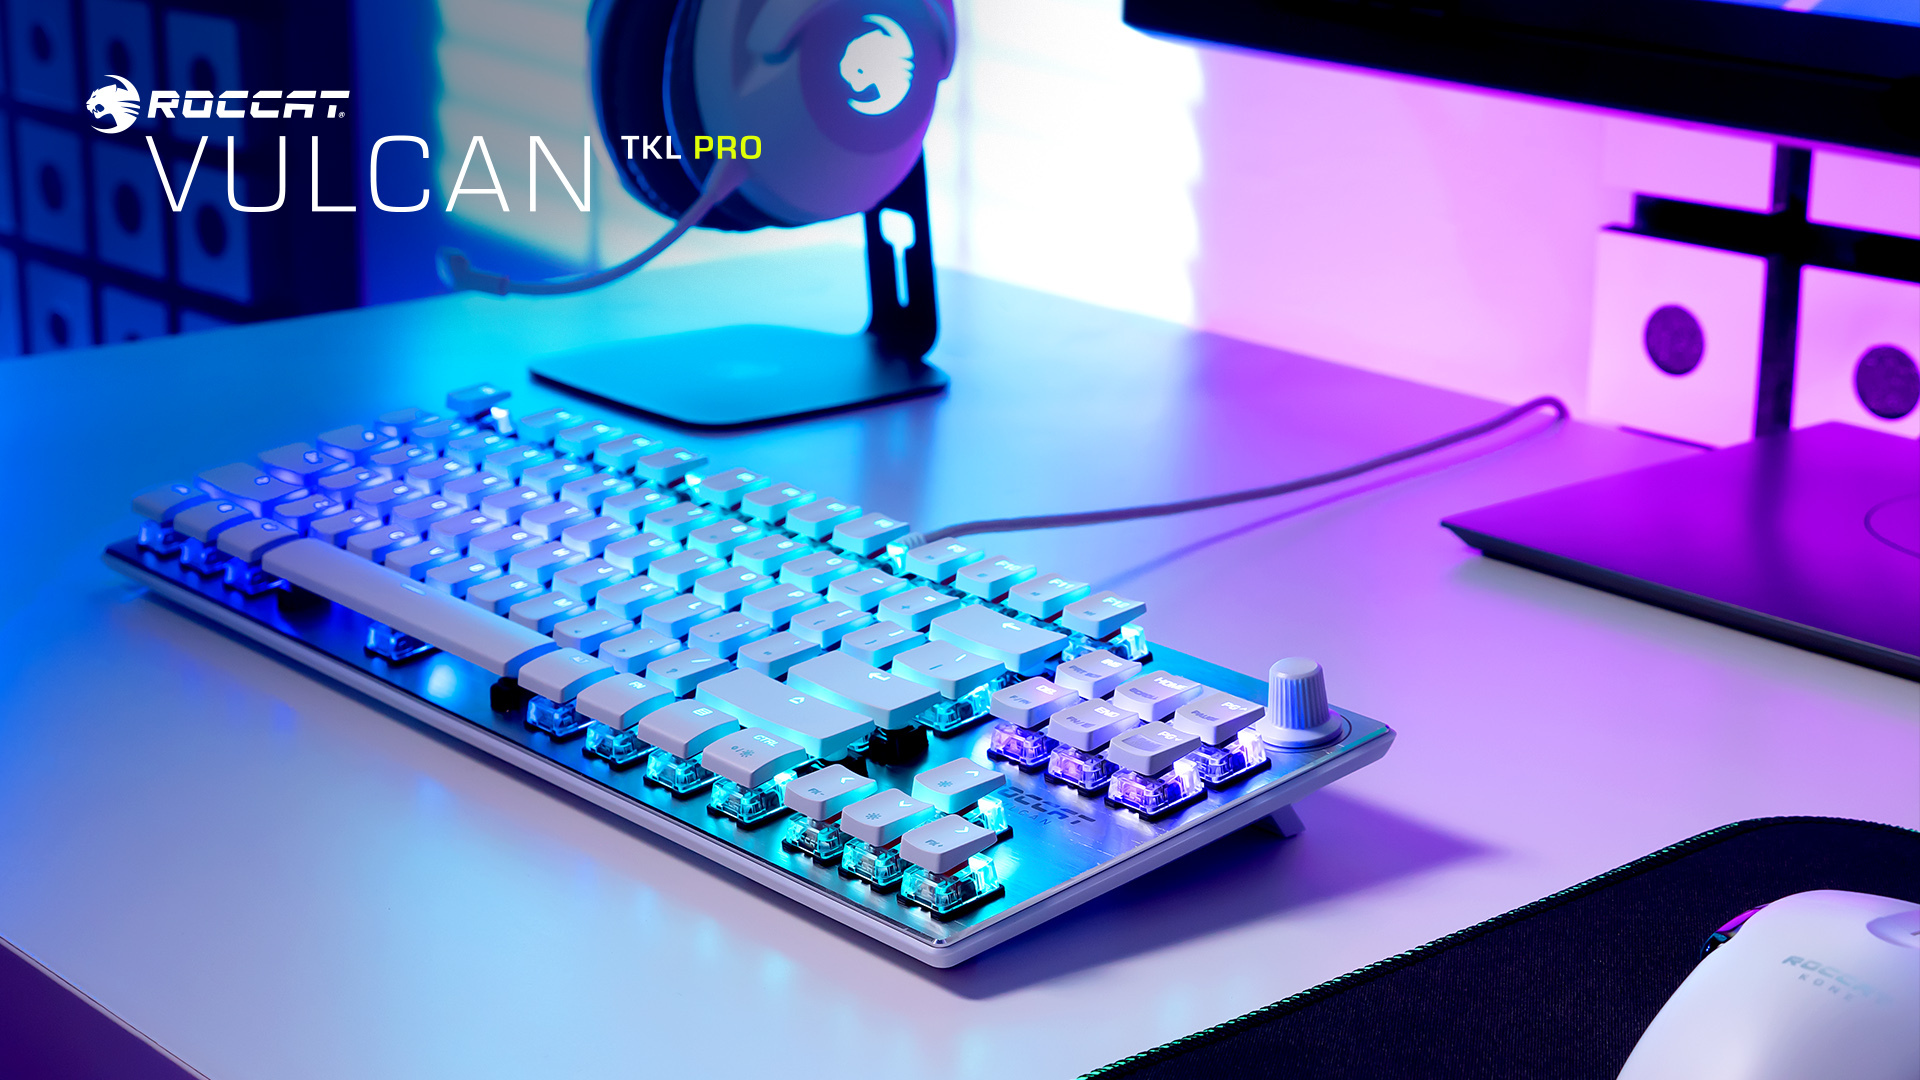 Vulcan TKL Pro PC Gaming Keyboard Is Now Available In Arctic White